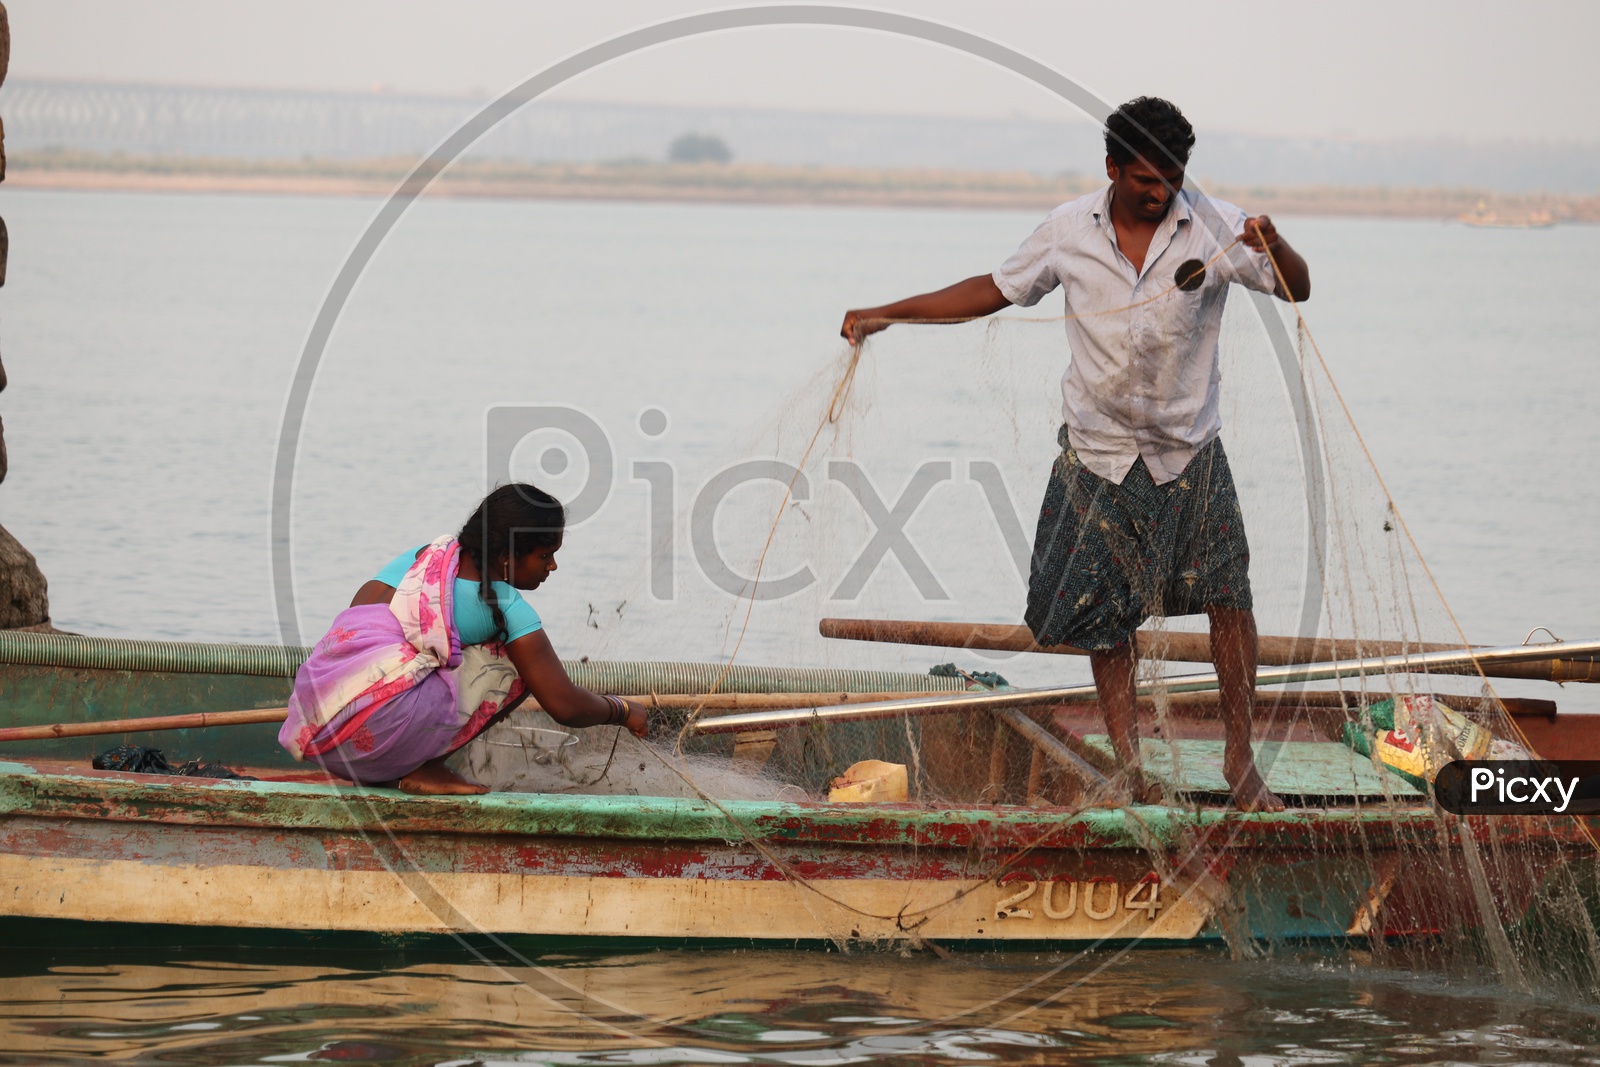 Man and his wife working hard for livelihood!